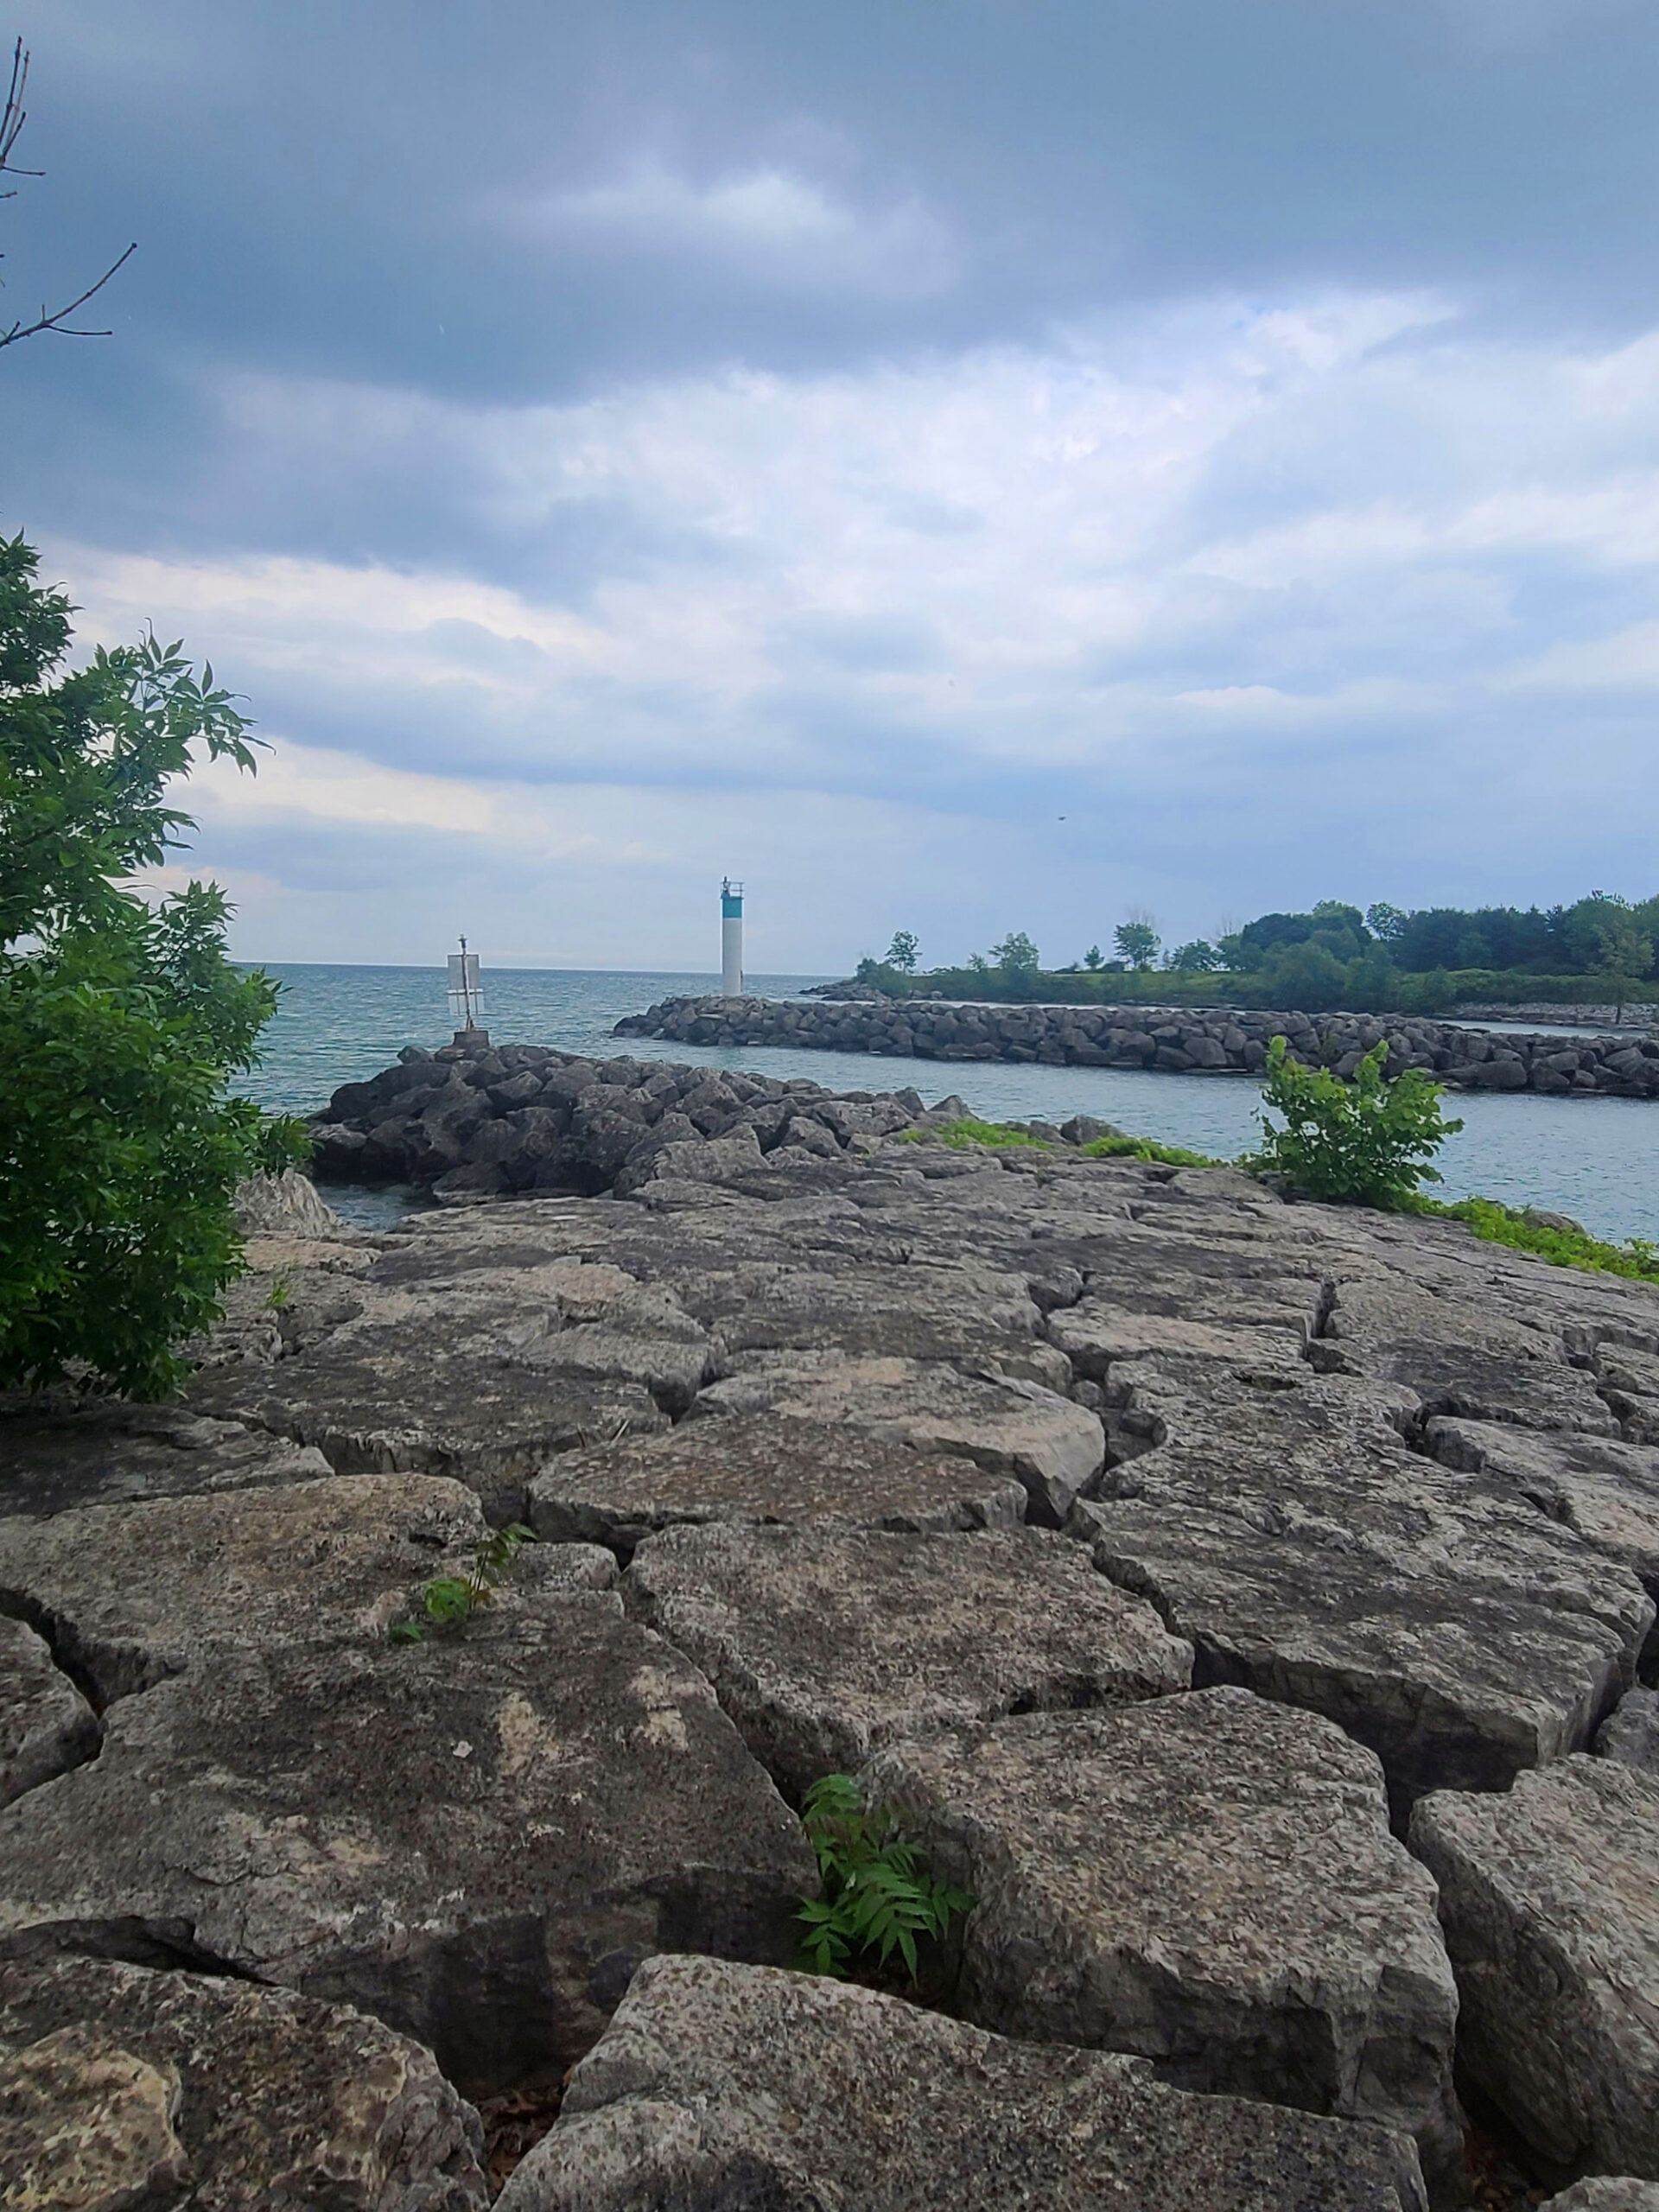 A long pile of boulders jutting out into lake ontario, with a lighthouse in the background.